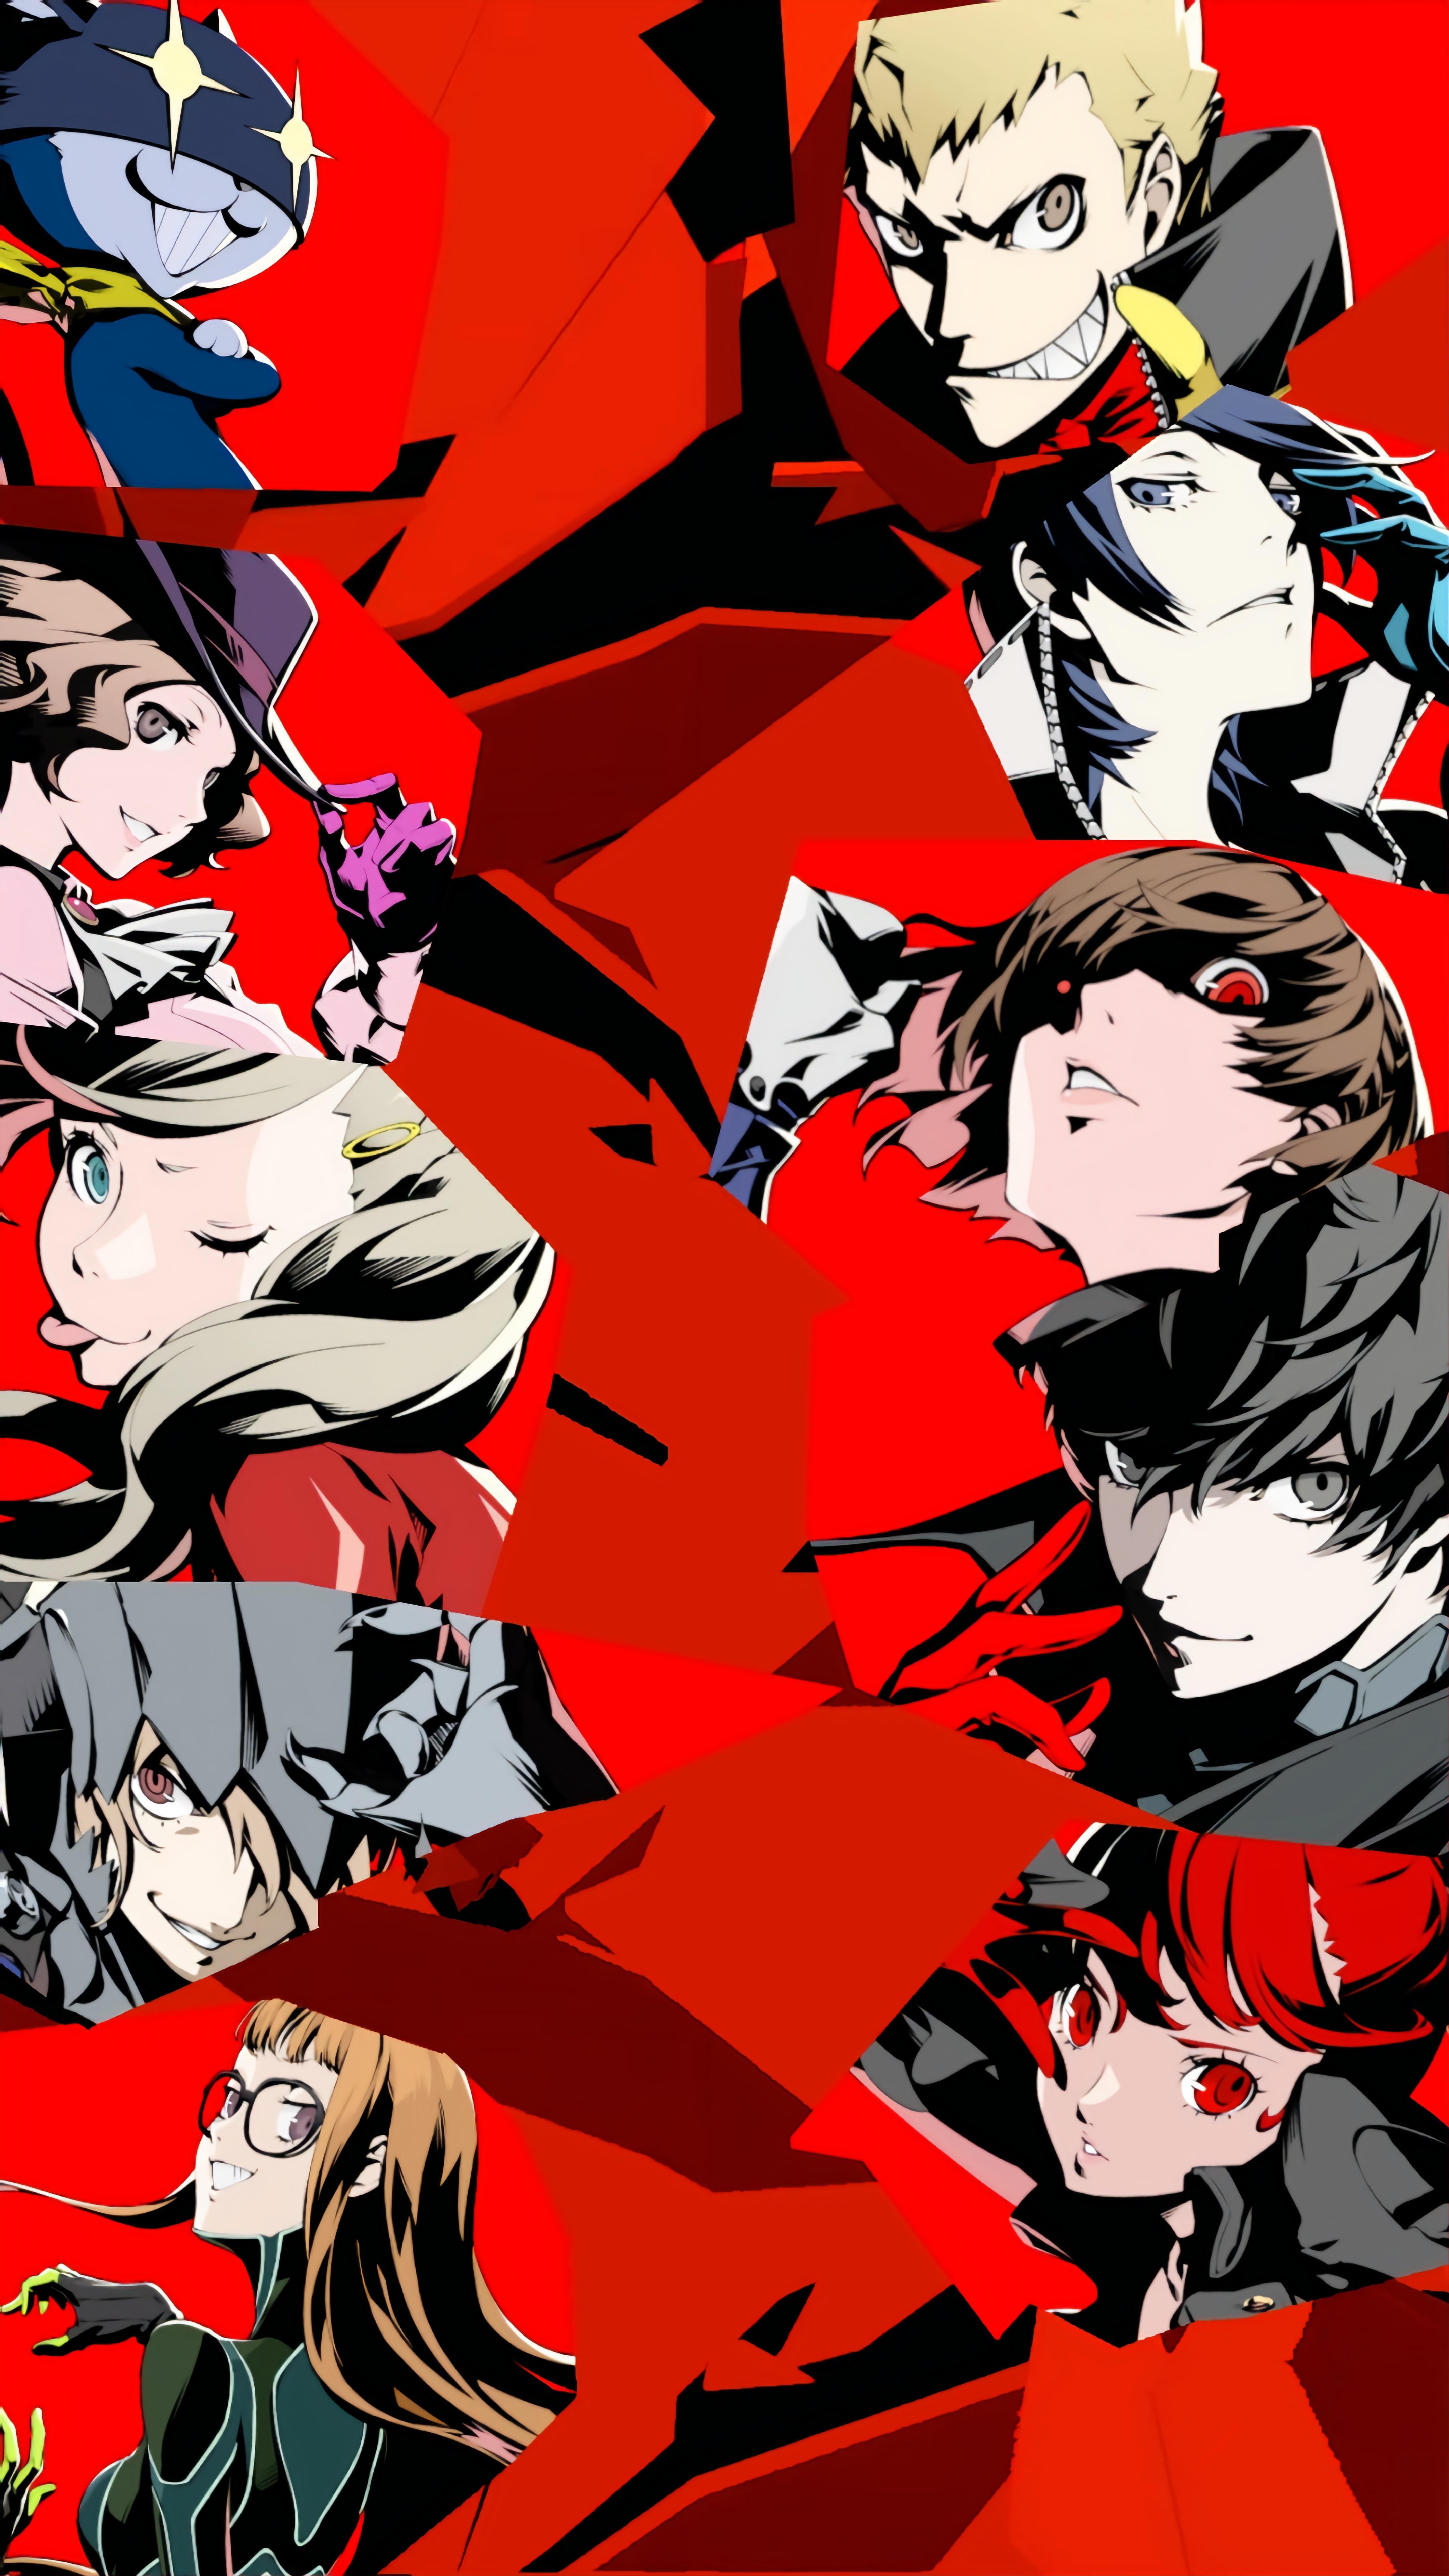 I used my mediocre editing skills to make a mobile wallpaper of all the Phantom Thieves